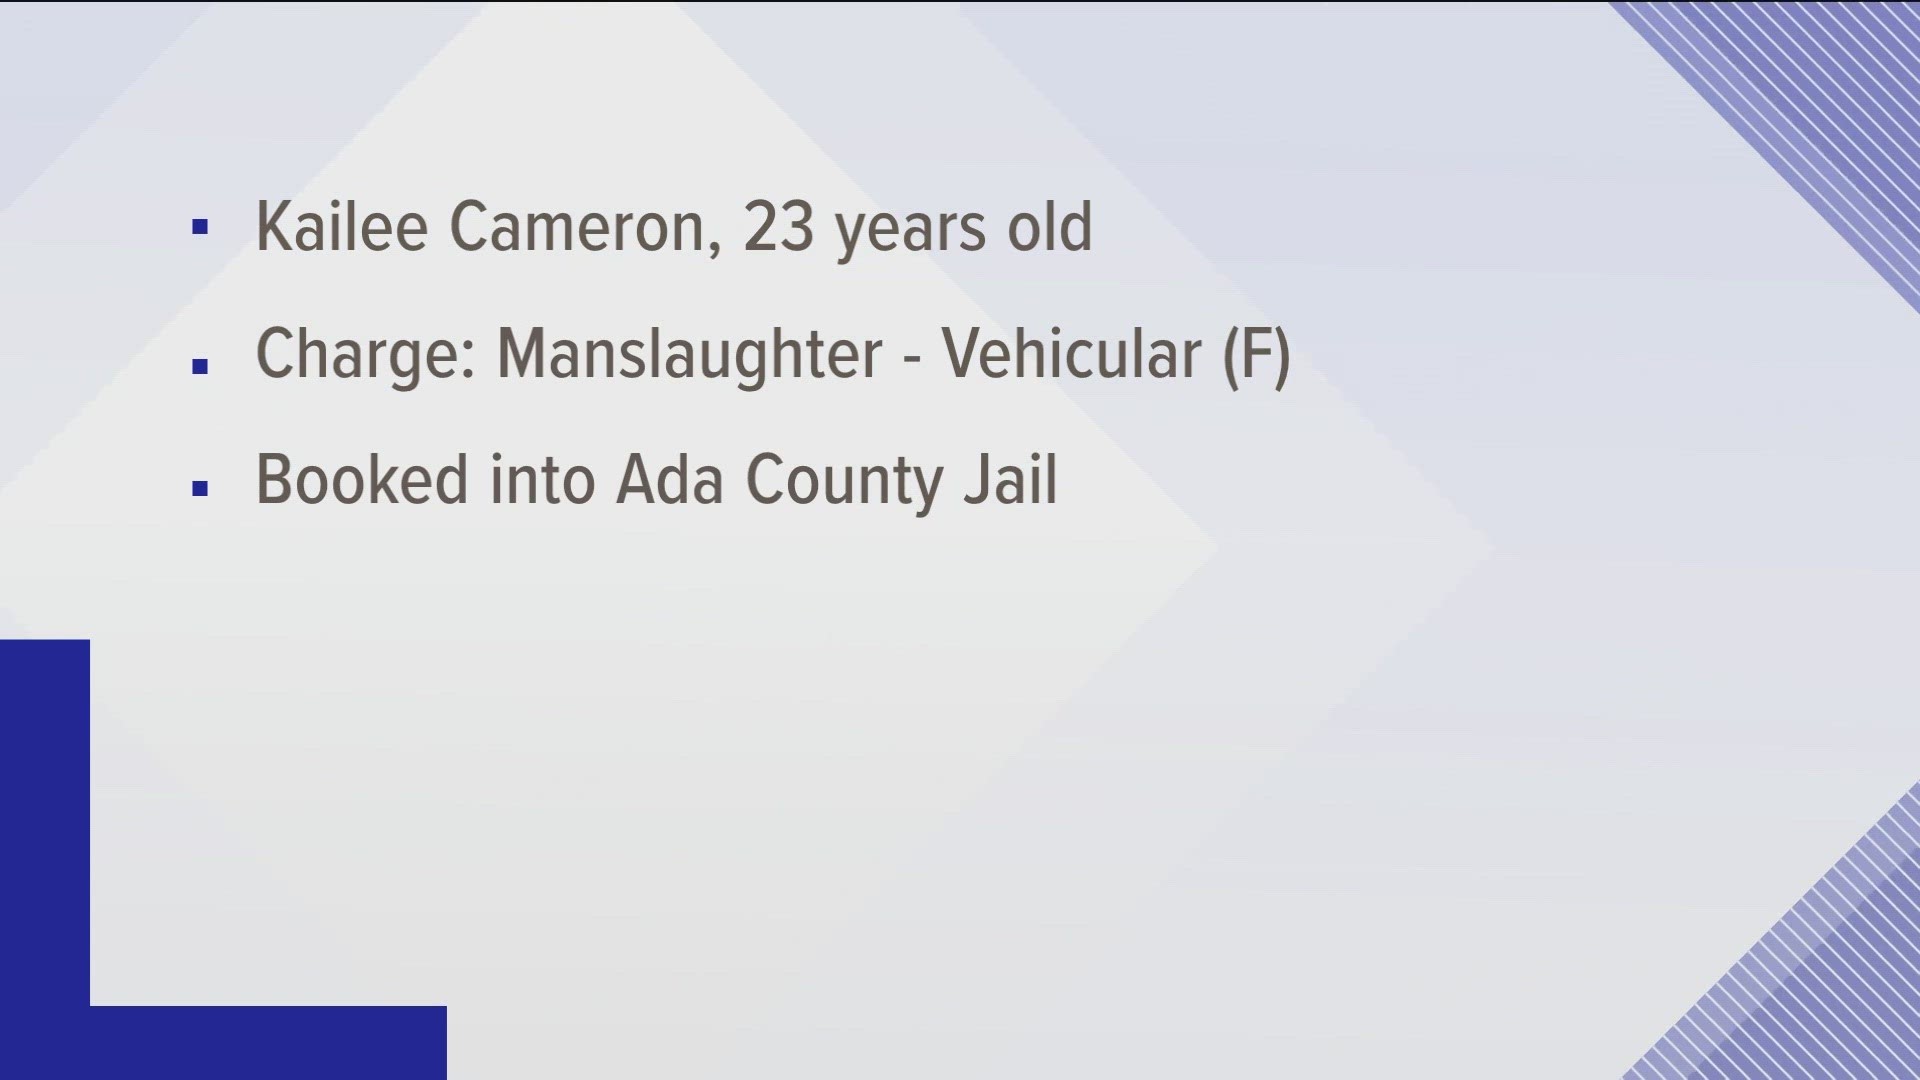 The Ada County Prosecutor's Office charged Kailee Cameron with vehicular manslaughter for her involvement in the crash.